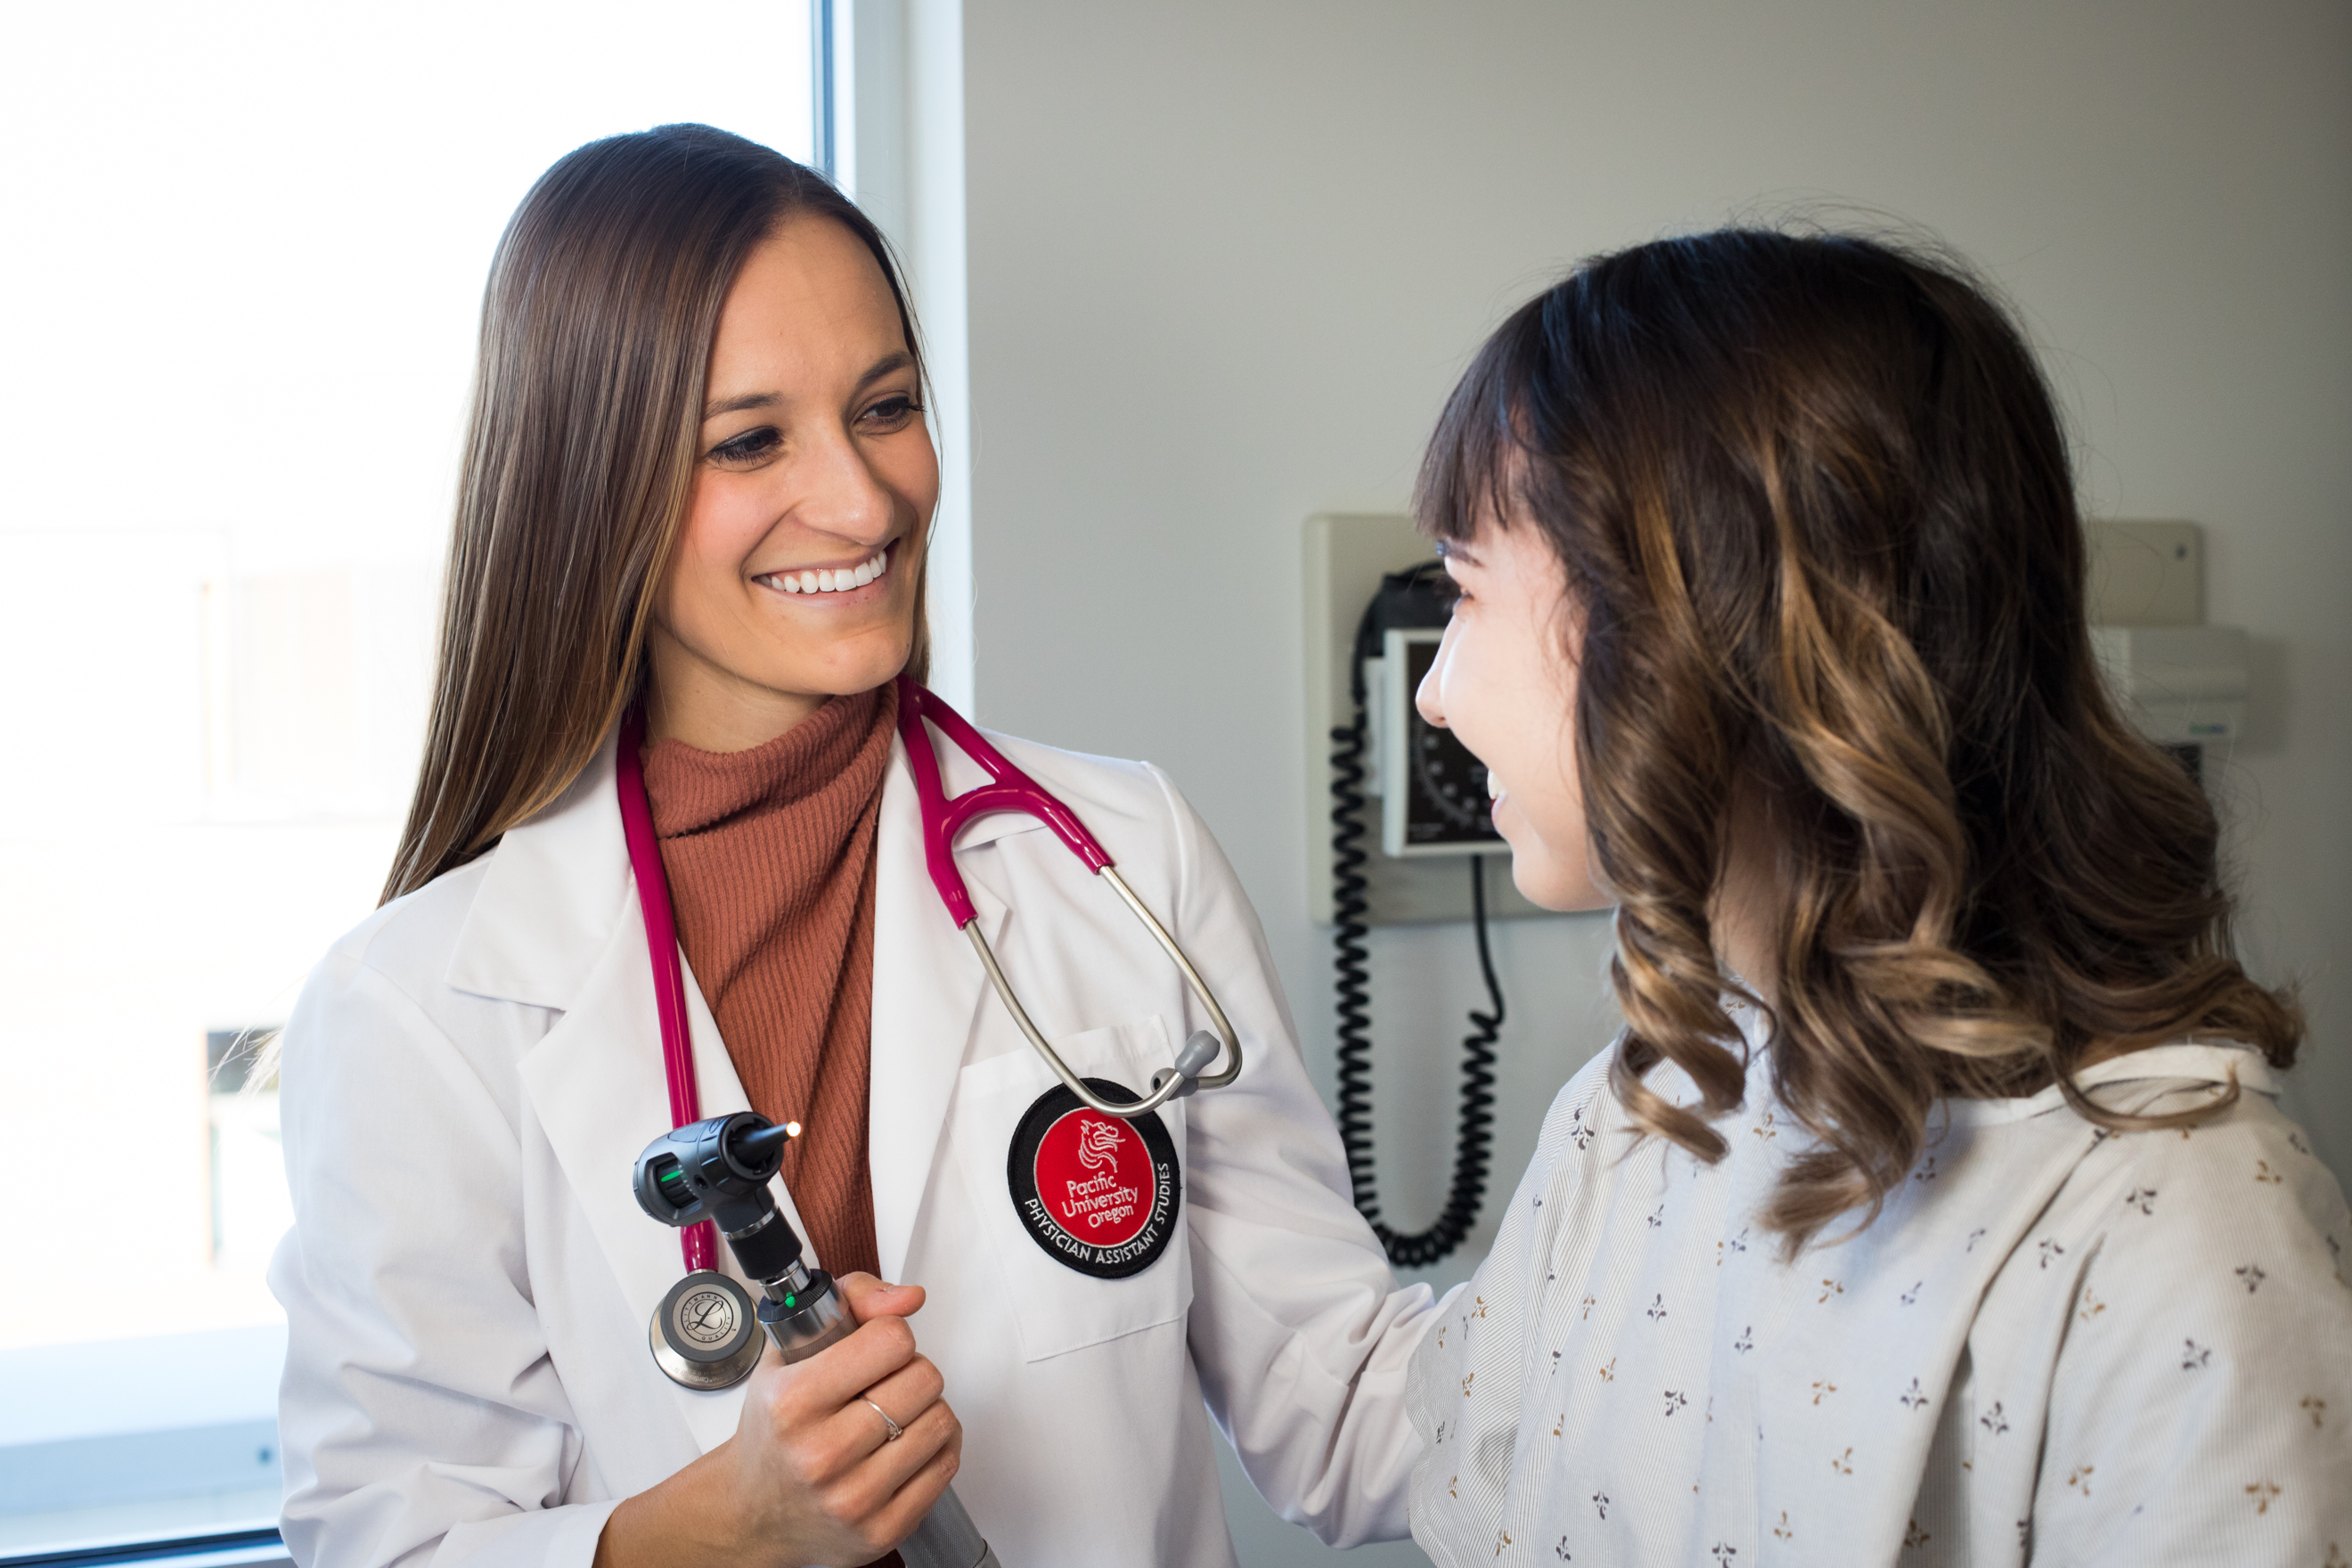 A physician assistant student consults with a patient.